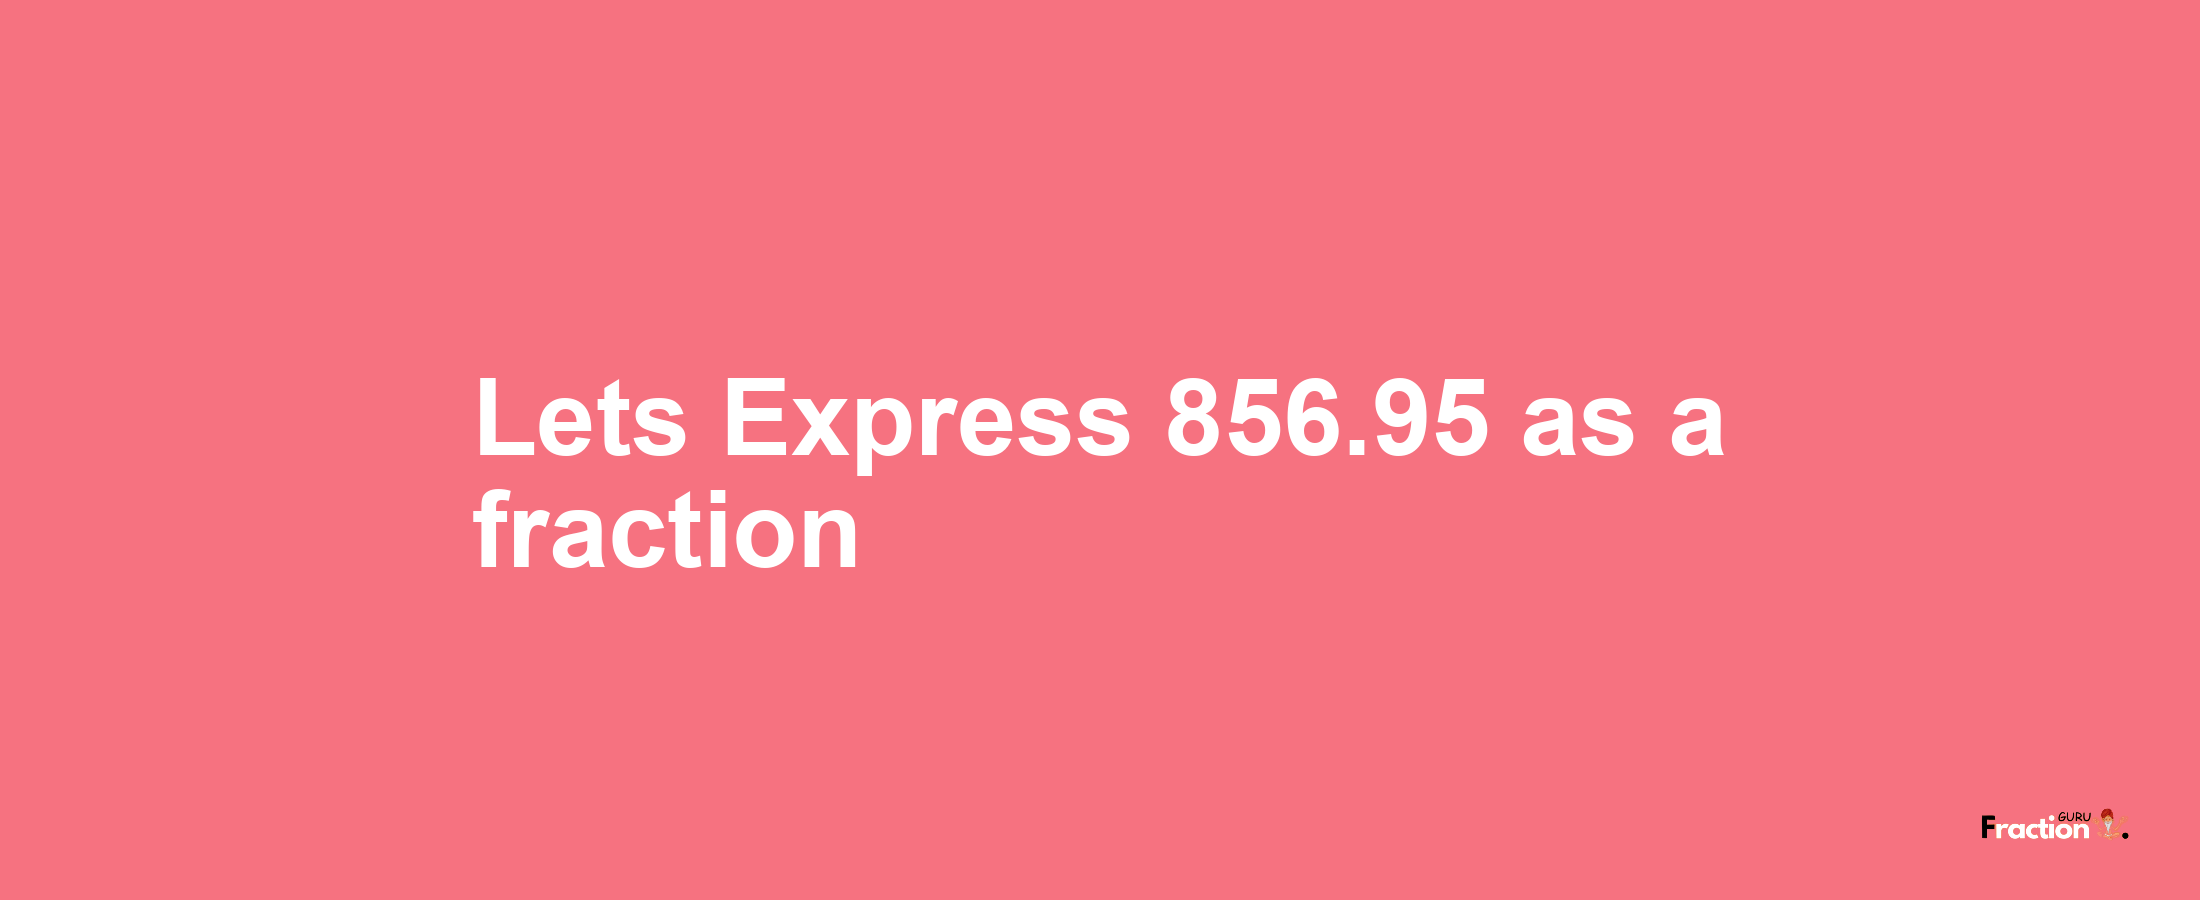 Lets Express 856.95 as afraction